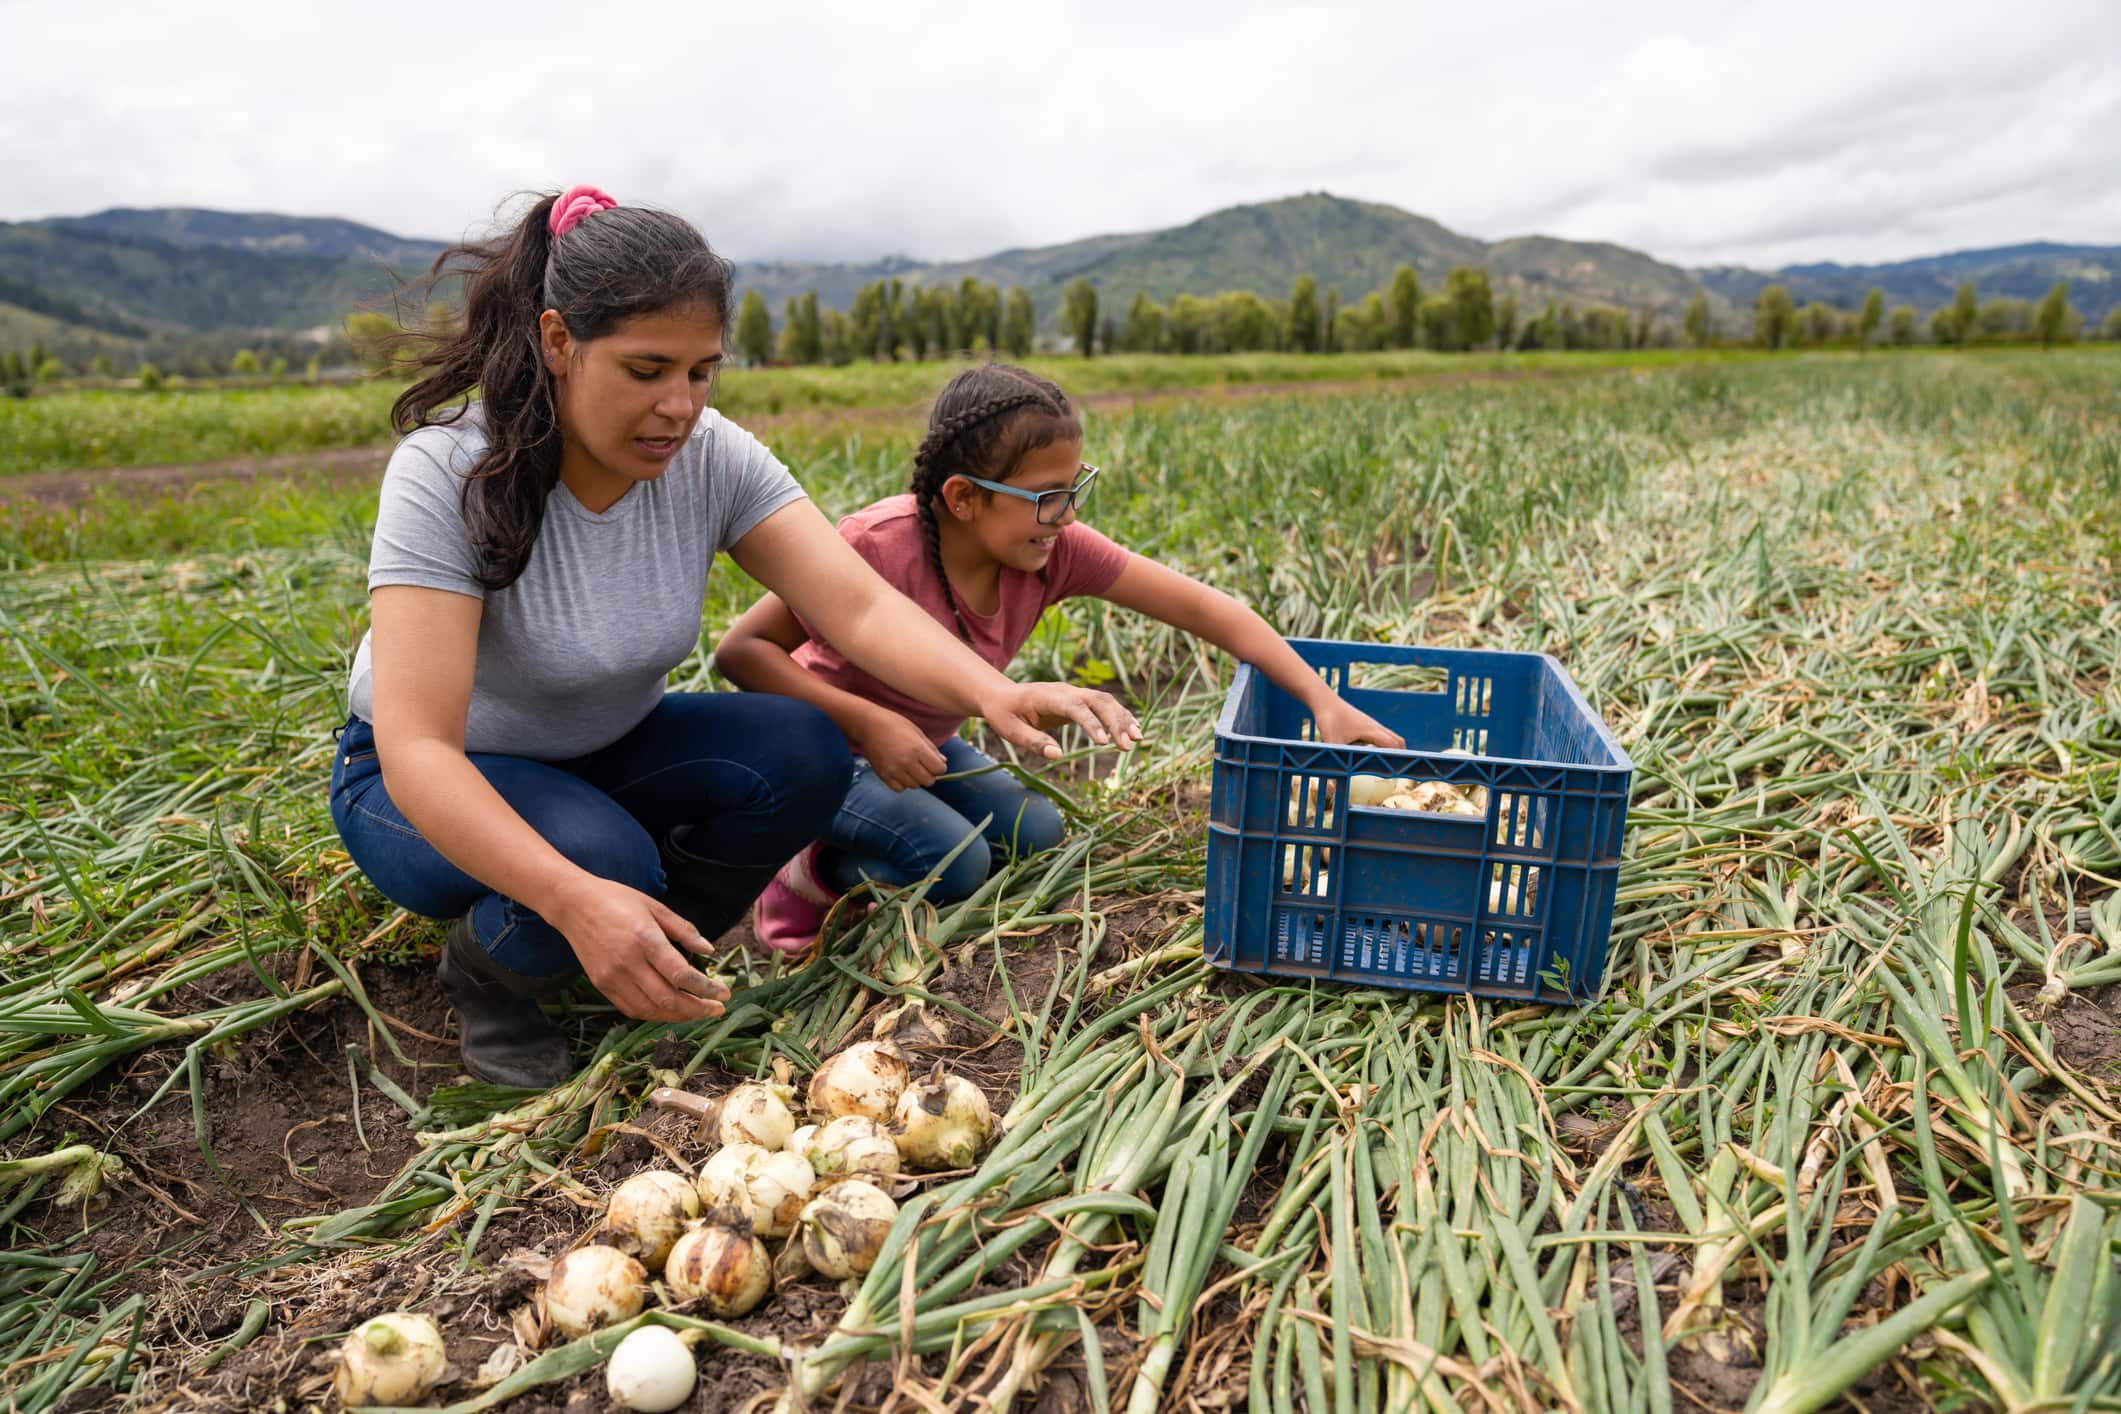 Latin American woman harvesting onions with the help of her daughter while working at a farm- agriculture concepts